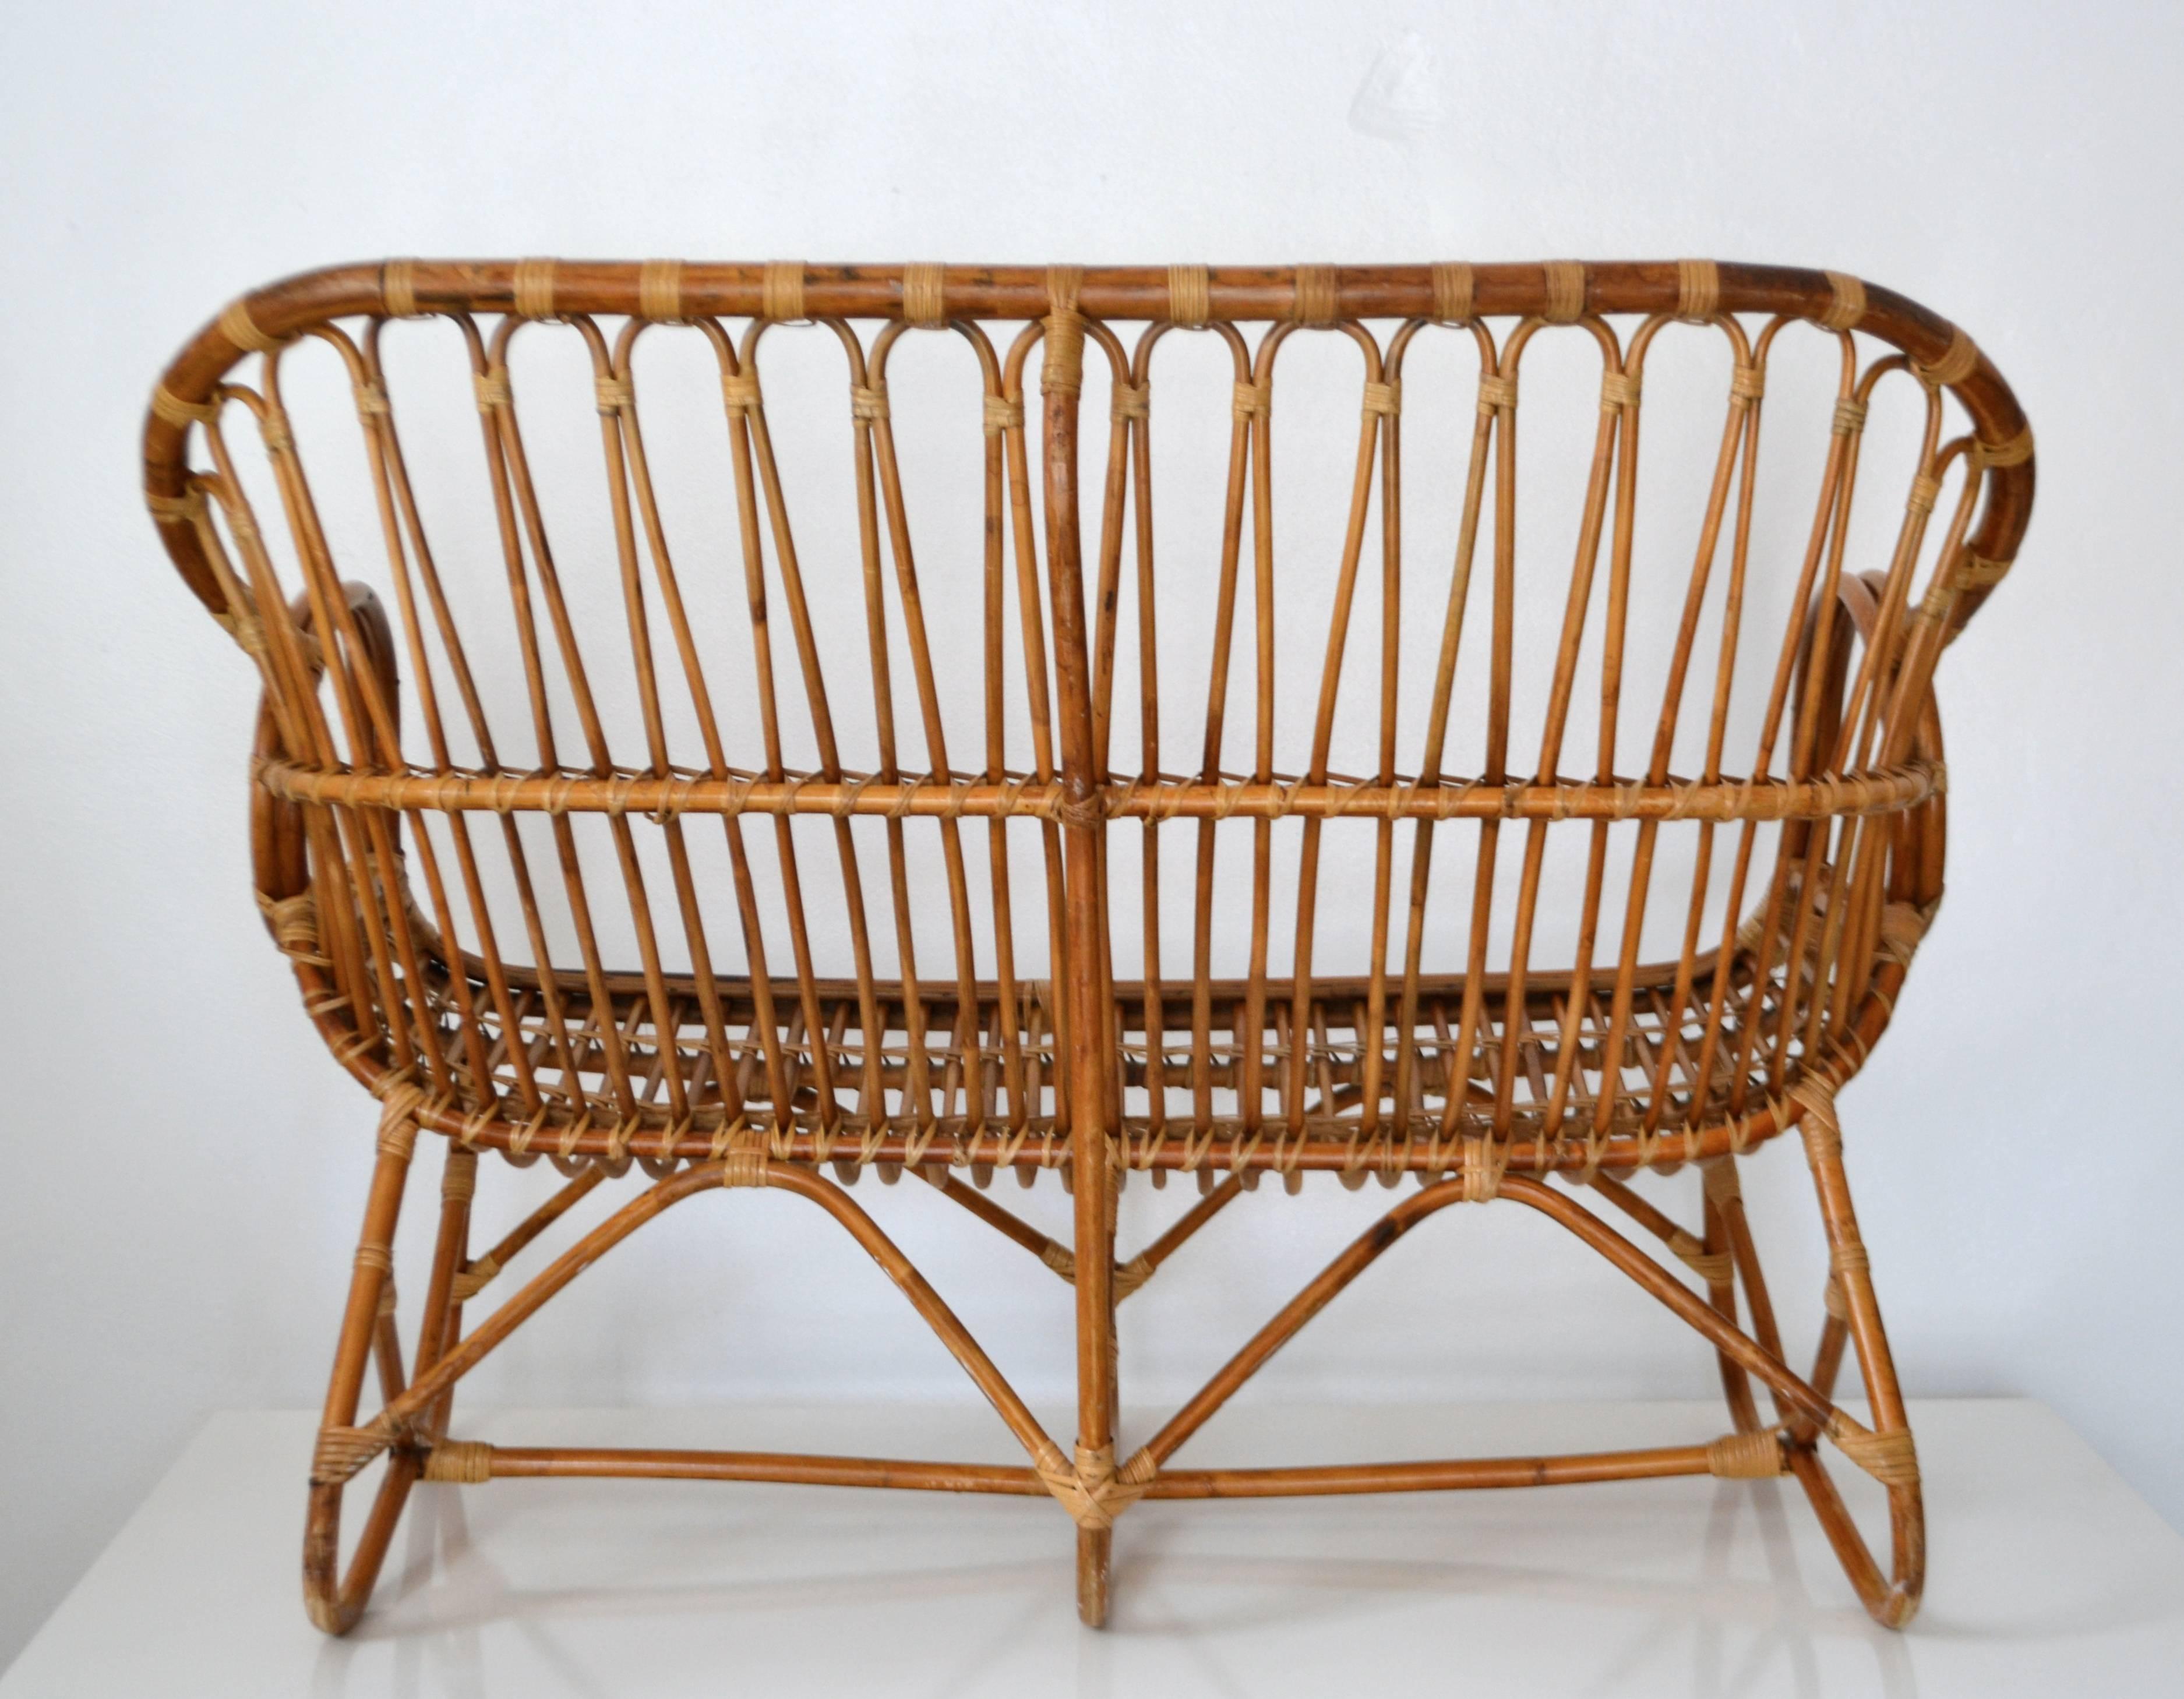 North American Midcentury Sculptural Bent Bamboo Settee For Sale